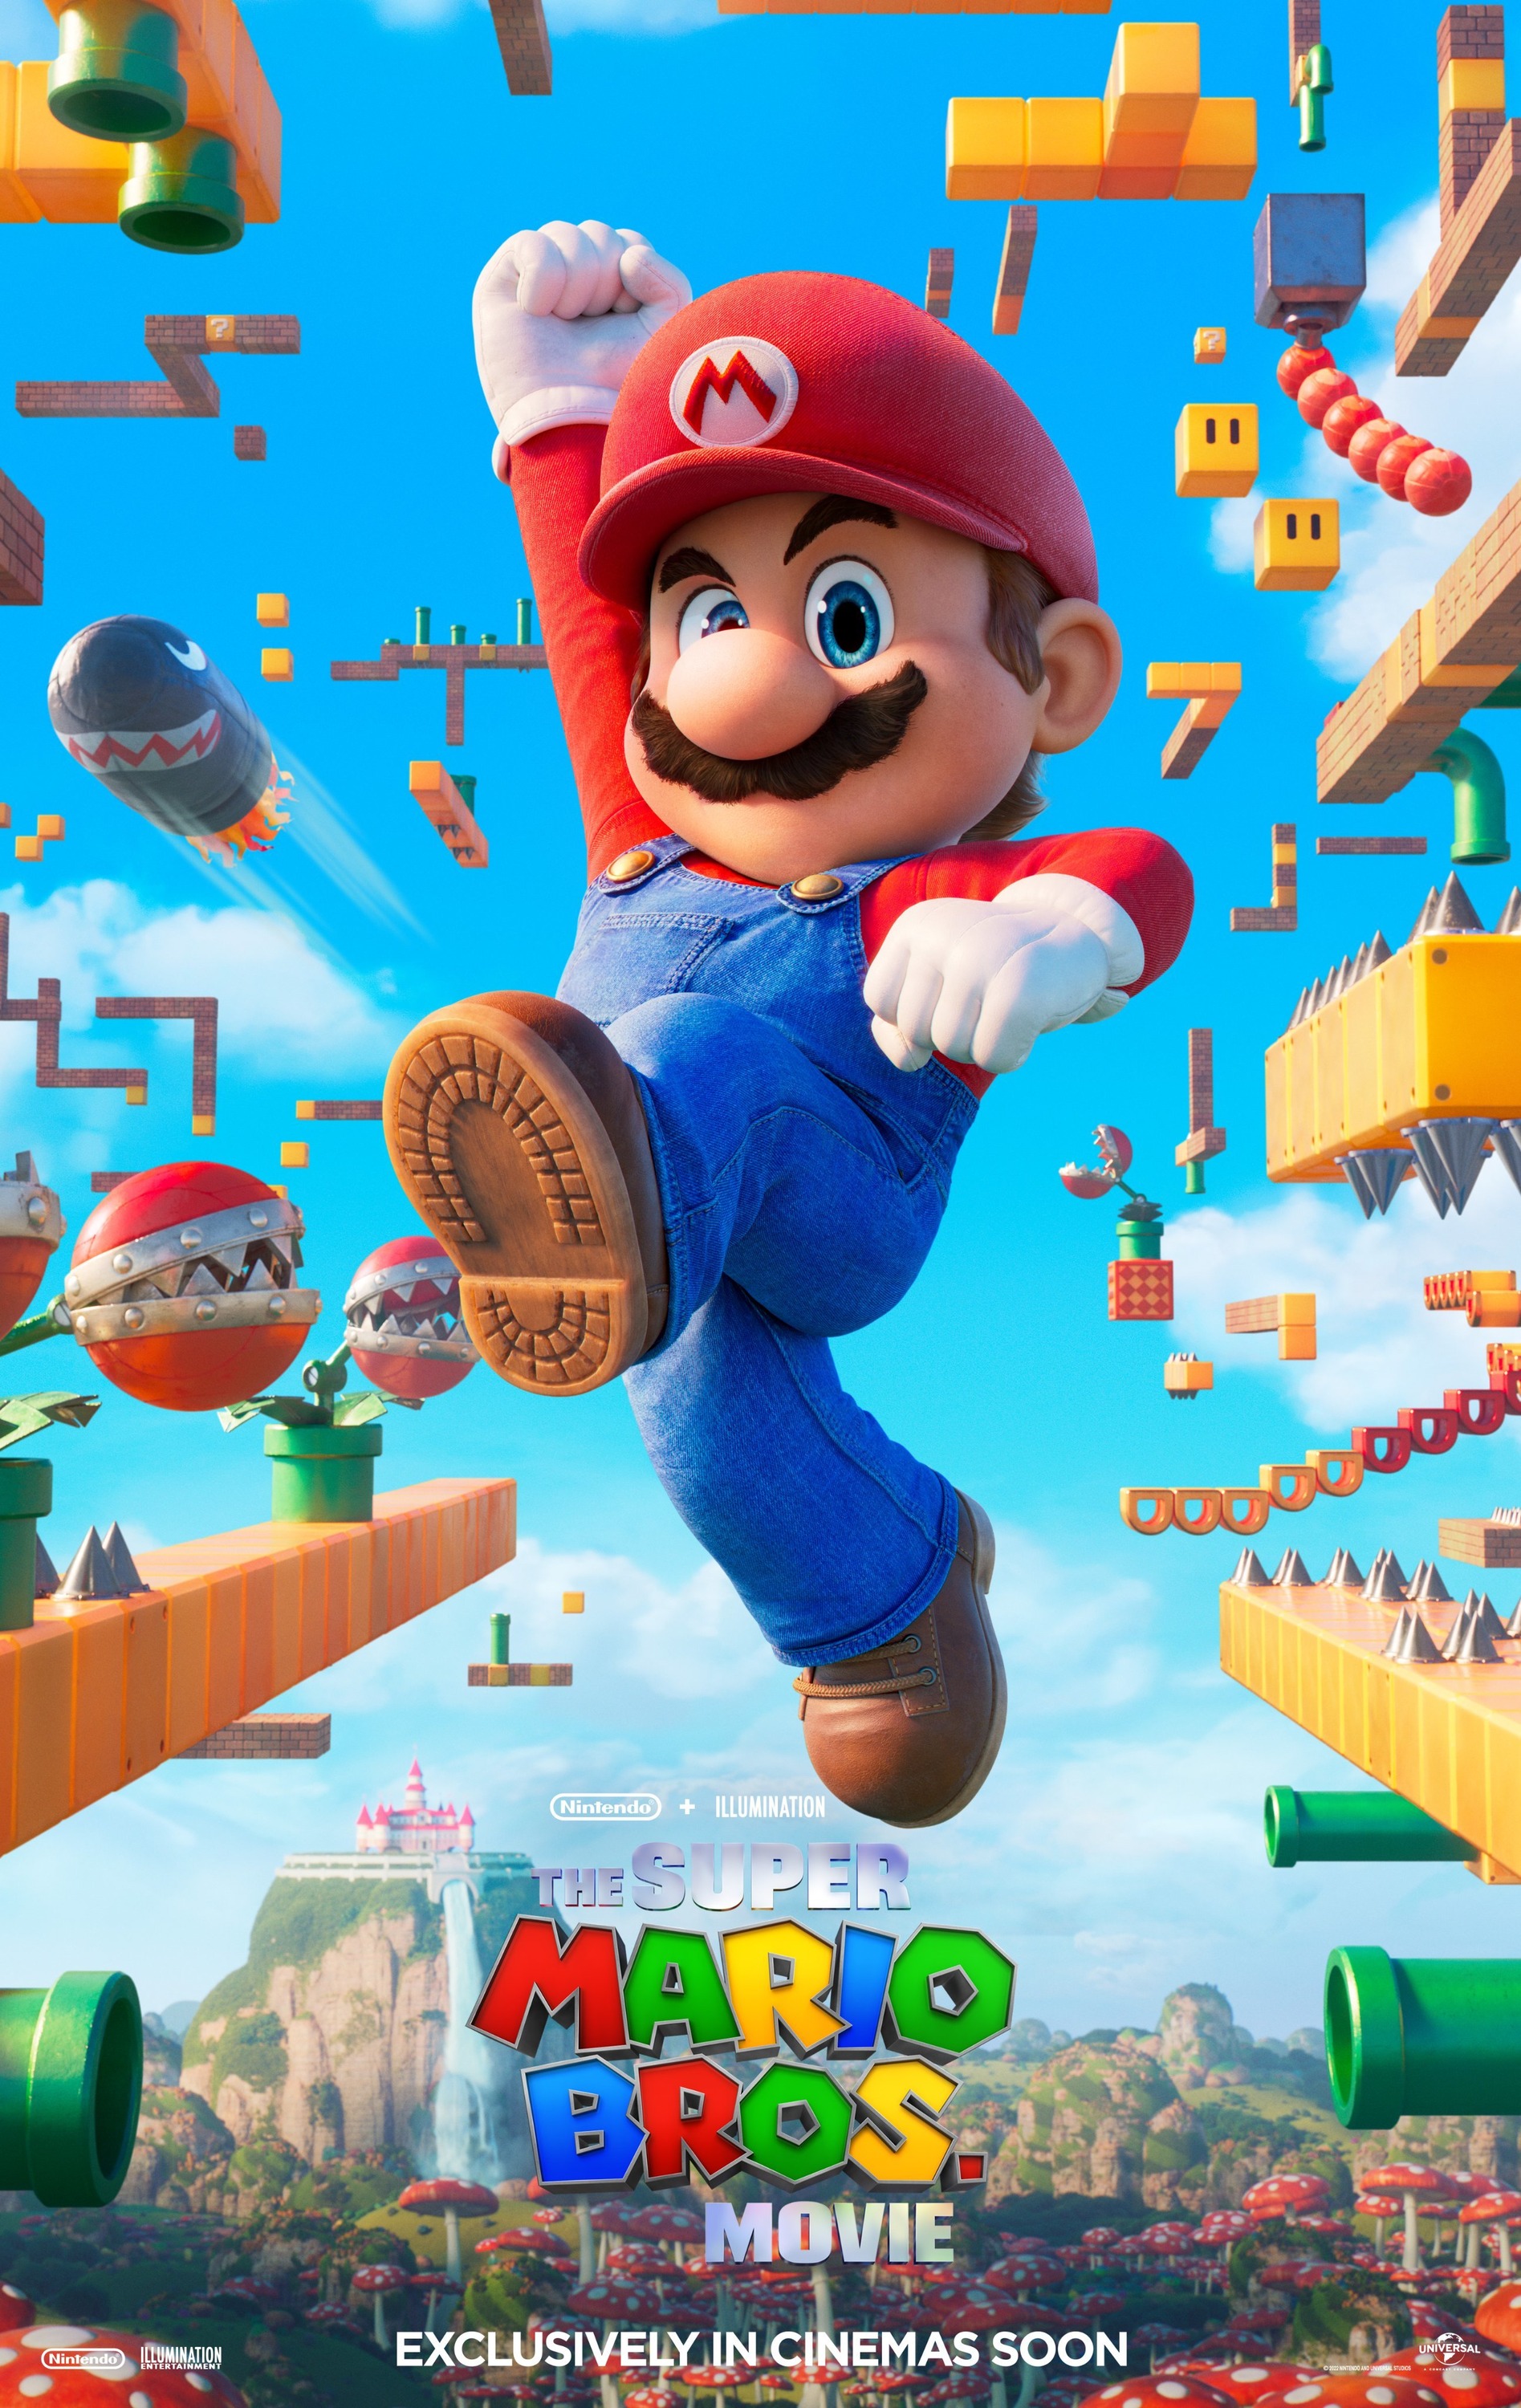 Mega Sized Movie Poster Image for Super Mario Bros: The Movie (#11 of 24)